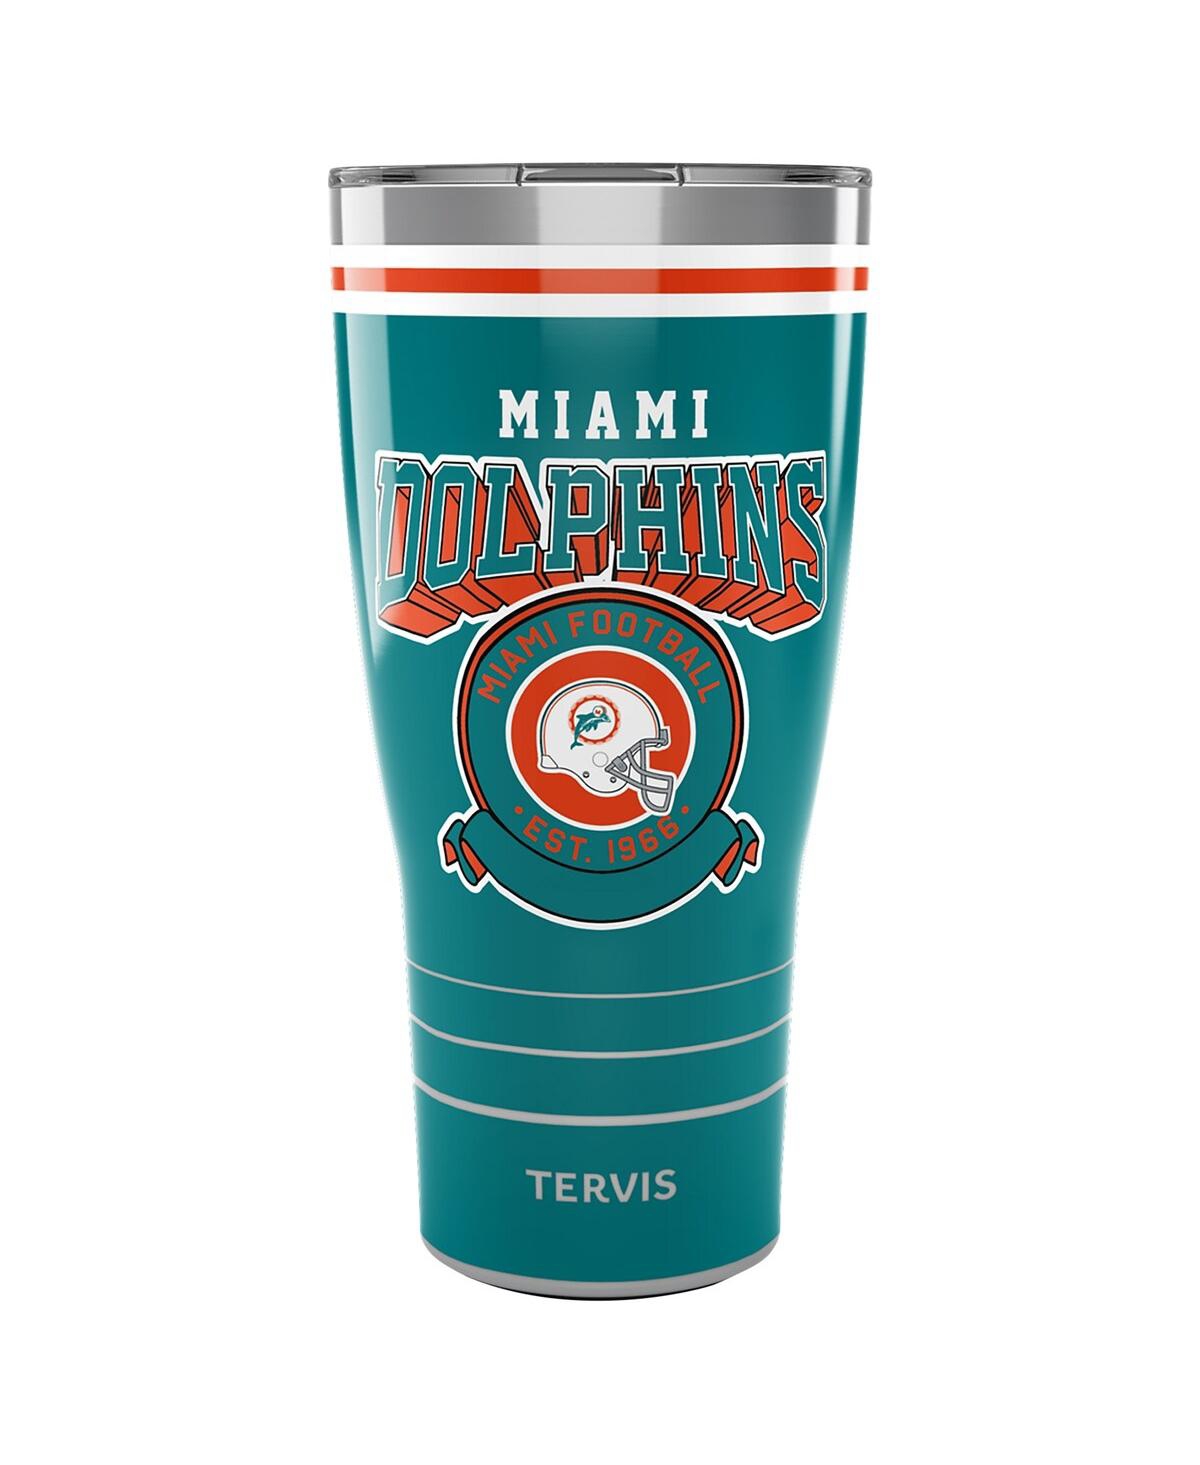 Tervis Tumbler Miami Dolphins Distressed 30 oz Vintage-like Tumbler In Blue